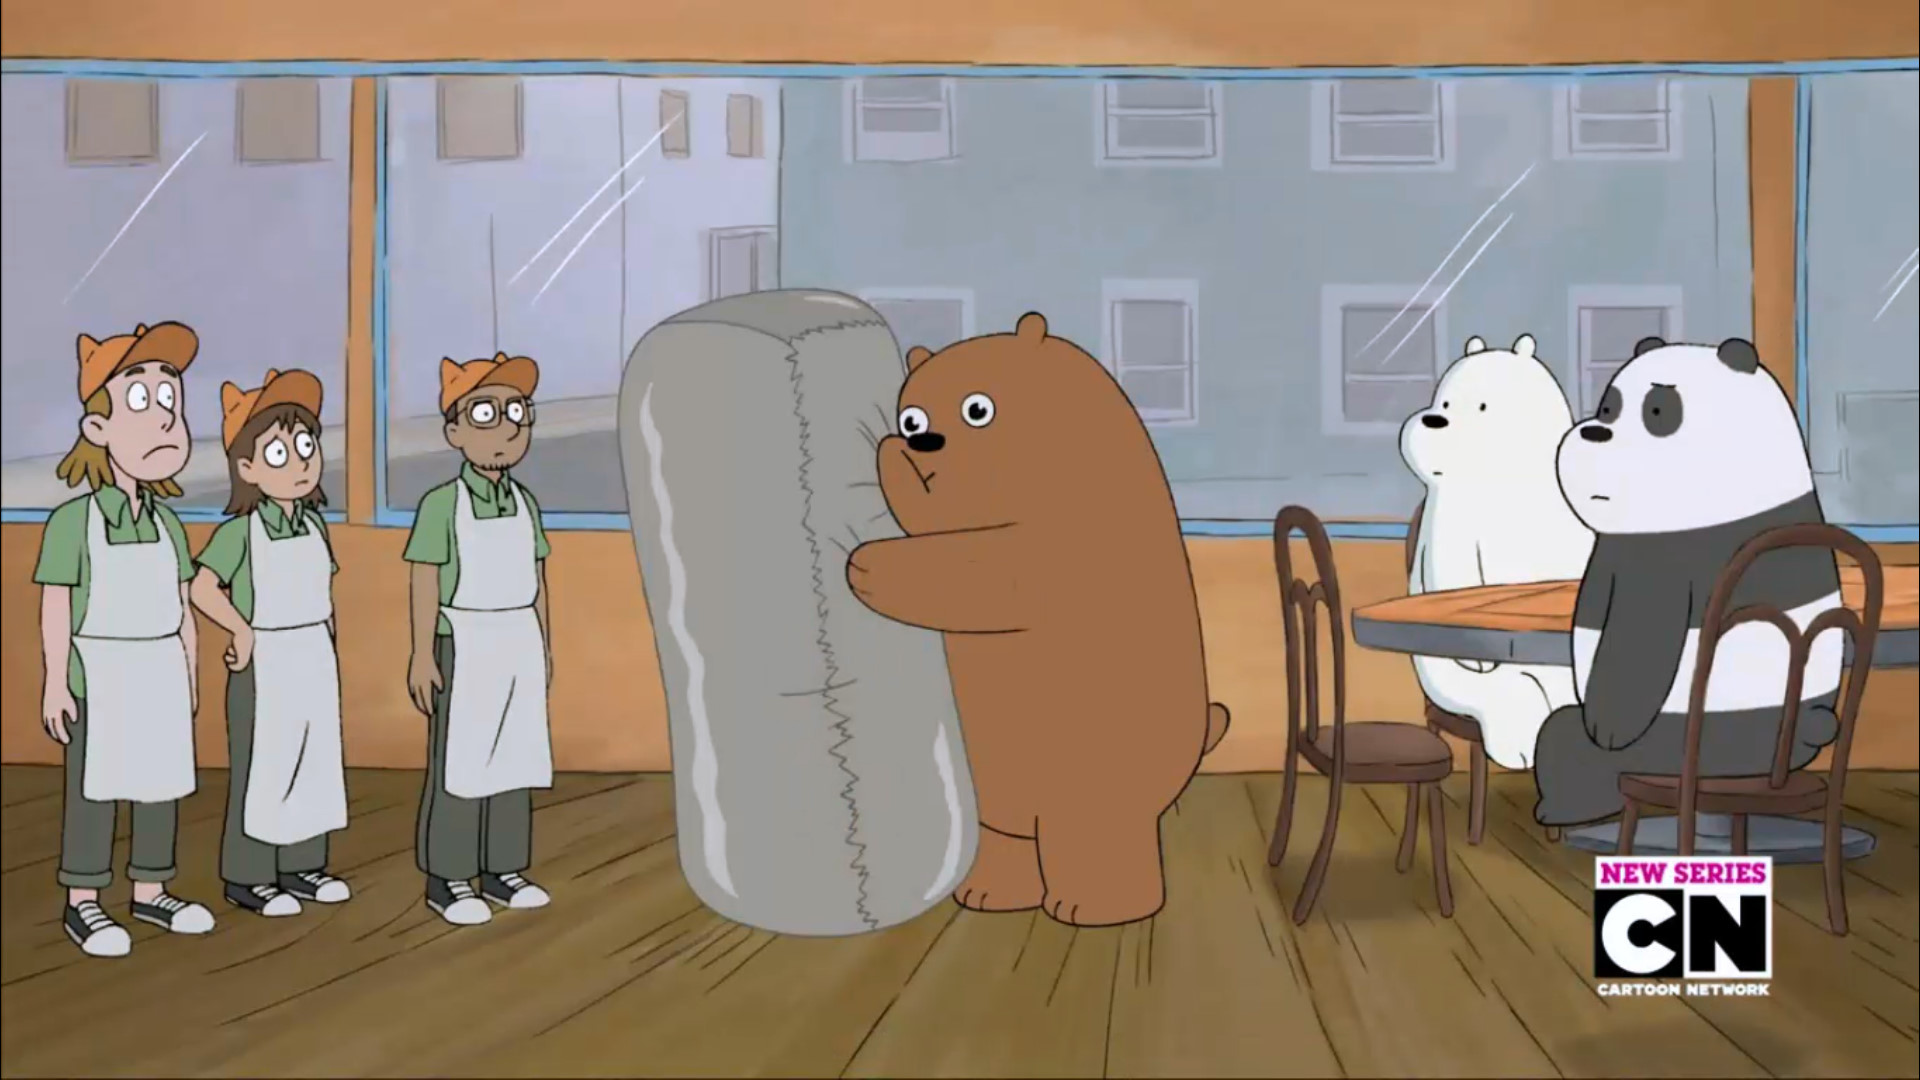 1920x1080 [We Bare Bears] Could someone explain this?